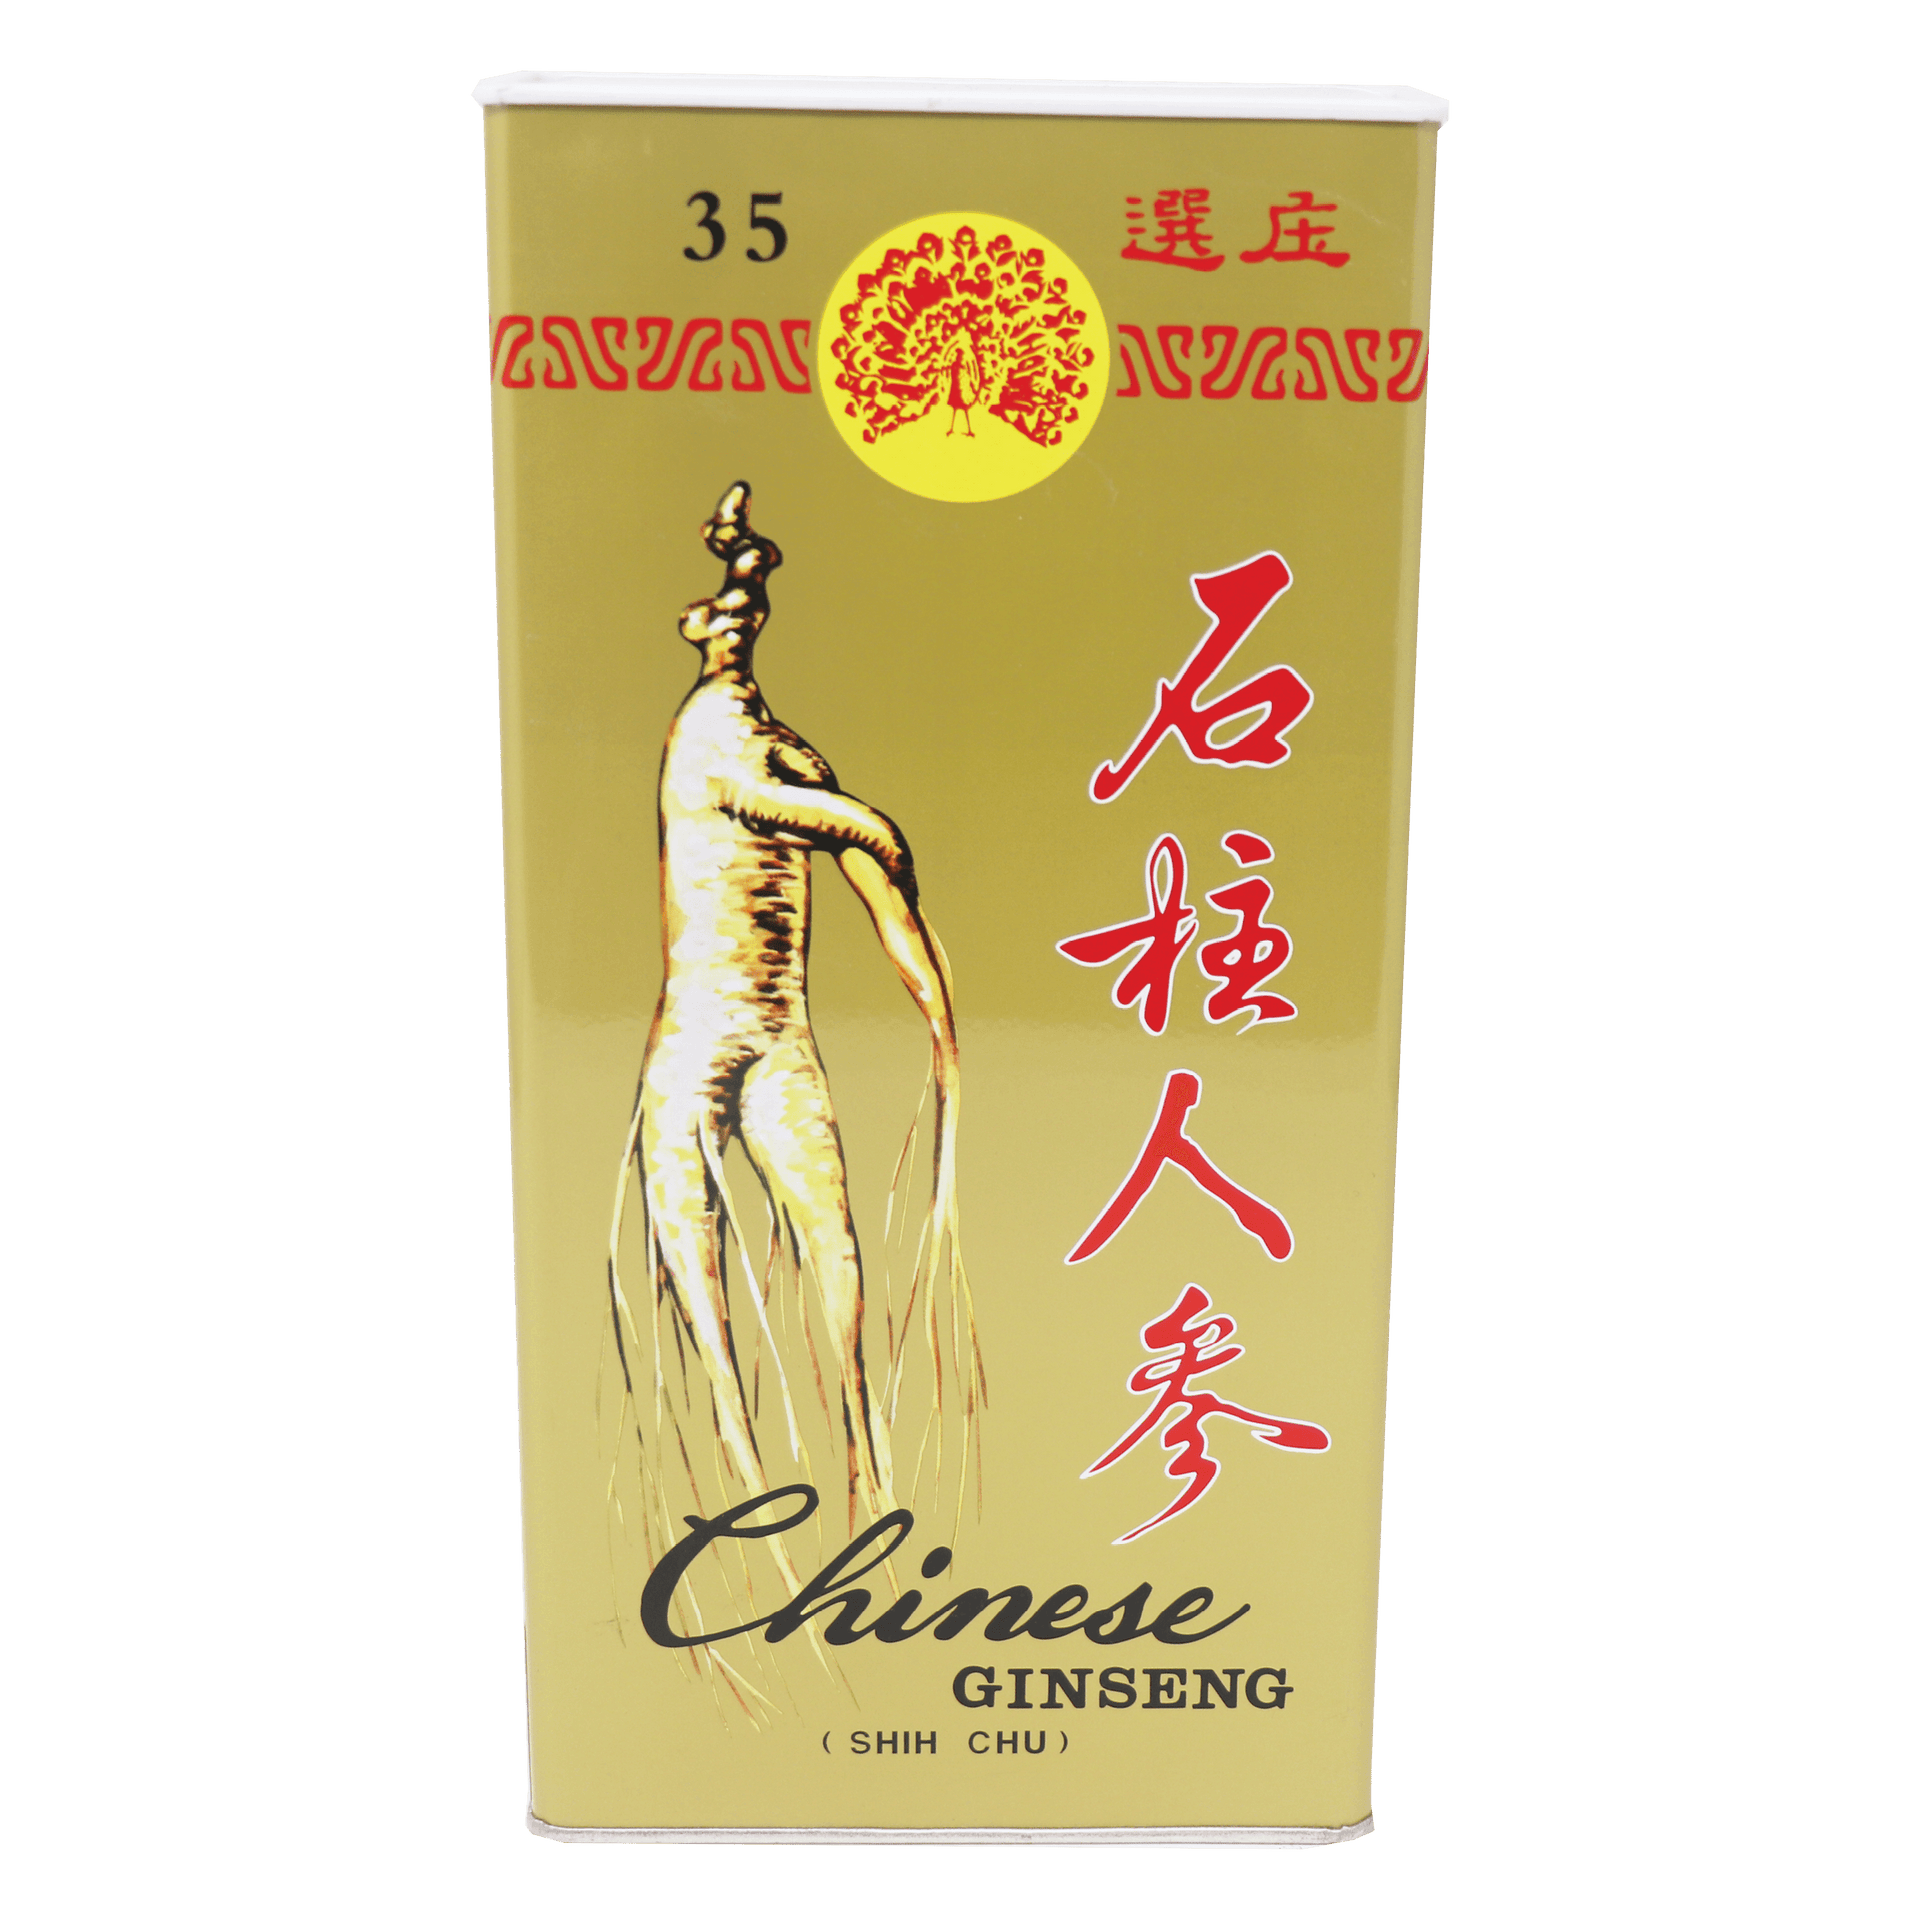 SHIH CHU Chinese GINSENG Small Size (35pieces/600g) - Buy at New Green Nutrition